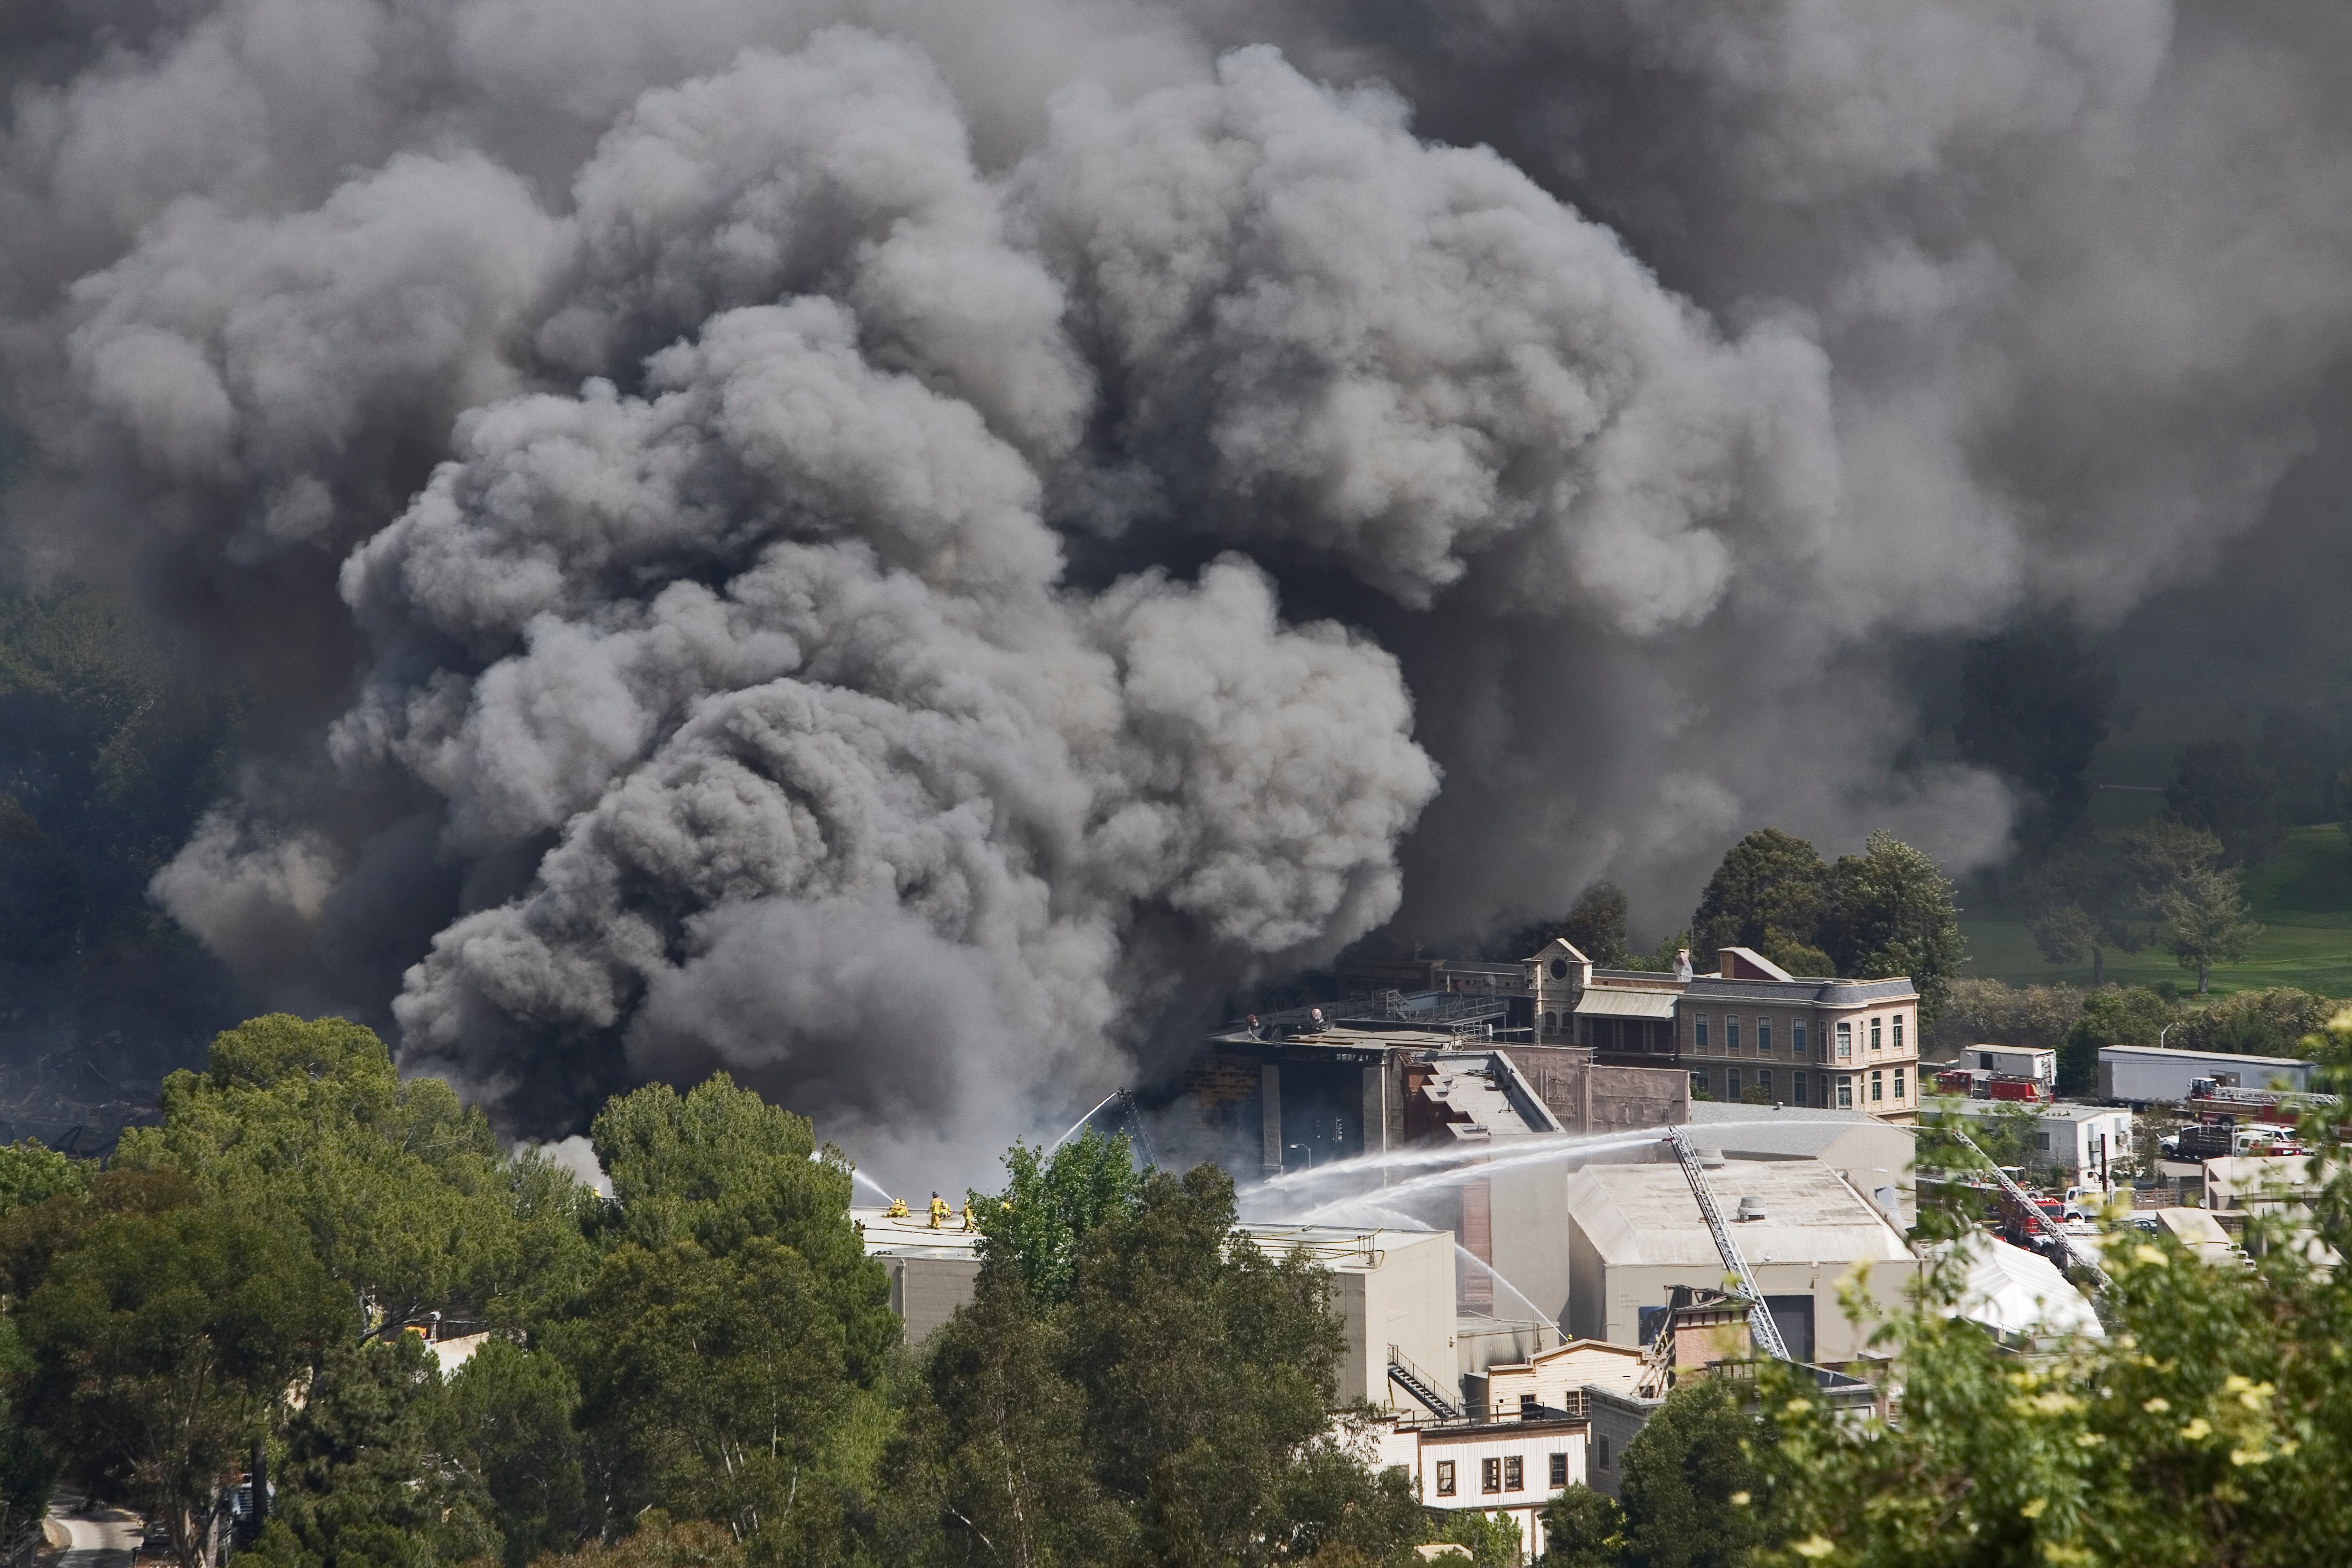 Fire at Universal Studios in 2008